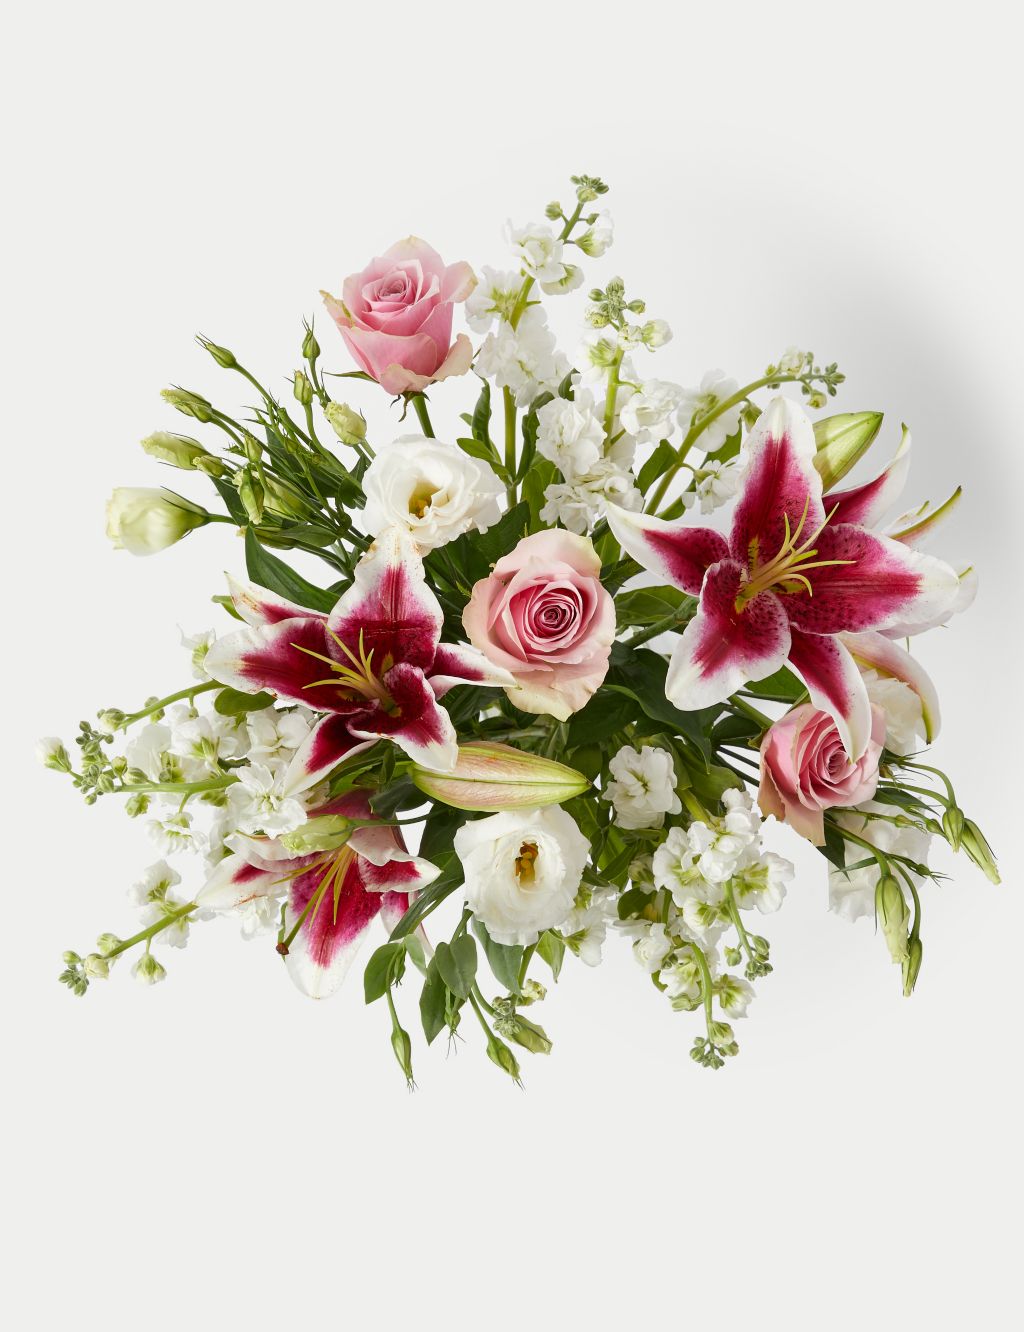 Rose, Lily & Lisianthus Flowers Bouquet 1 of 5